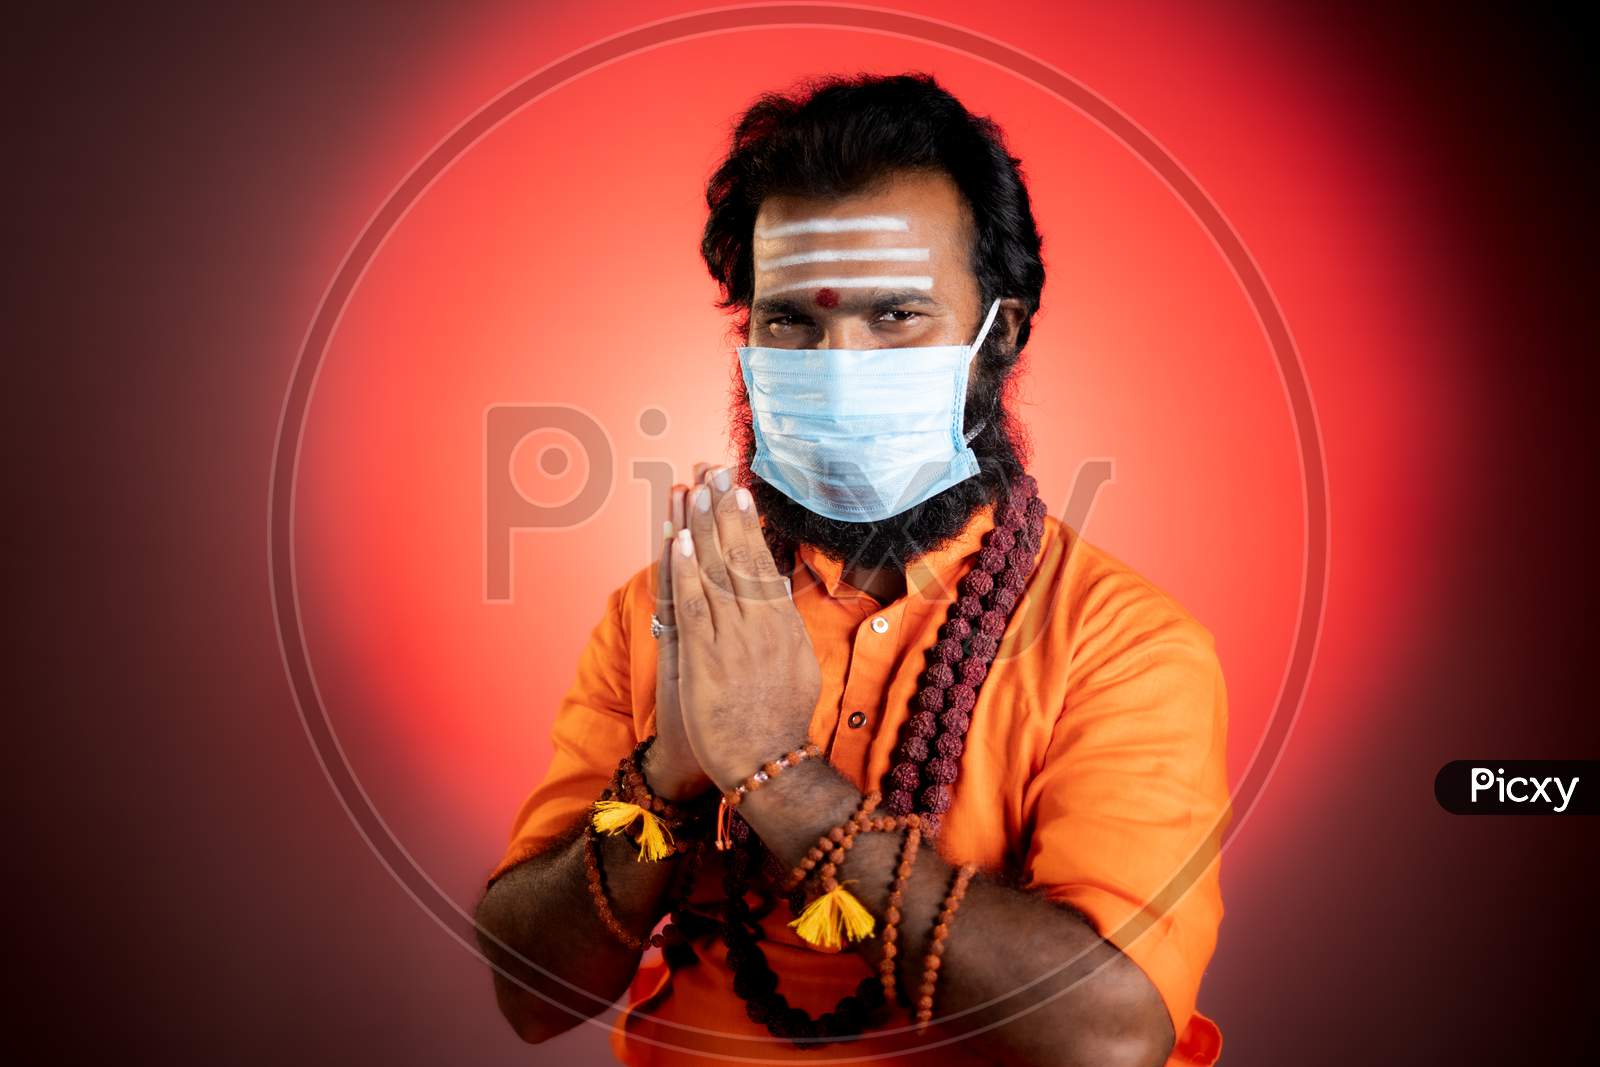 Smiling Indian God Man Or Holy Priest Doing Namaste With Medical Face Mask By Looking At Camera - Concept Showing Of Saint Or Minister Of Hindu Religion During Coronavirus Covid-19 Pandemic At Monastery.